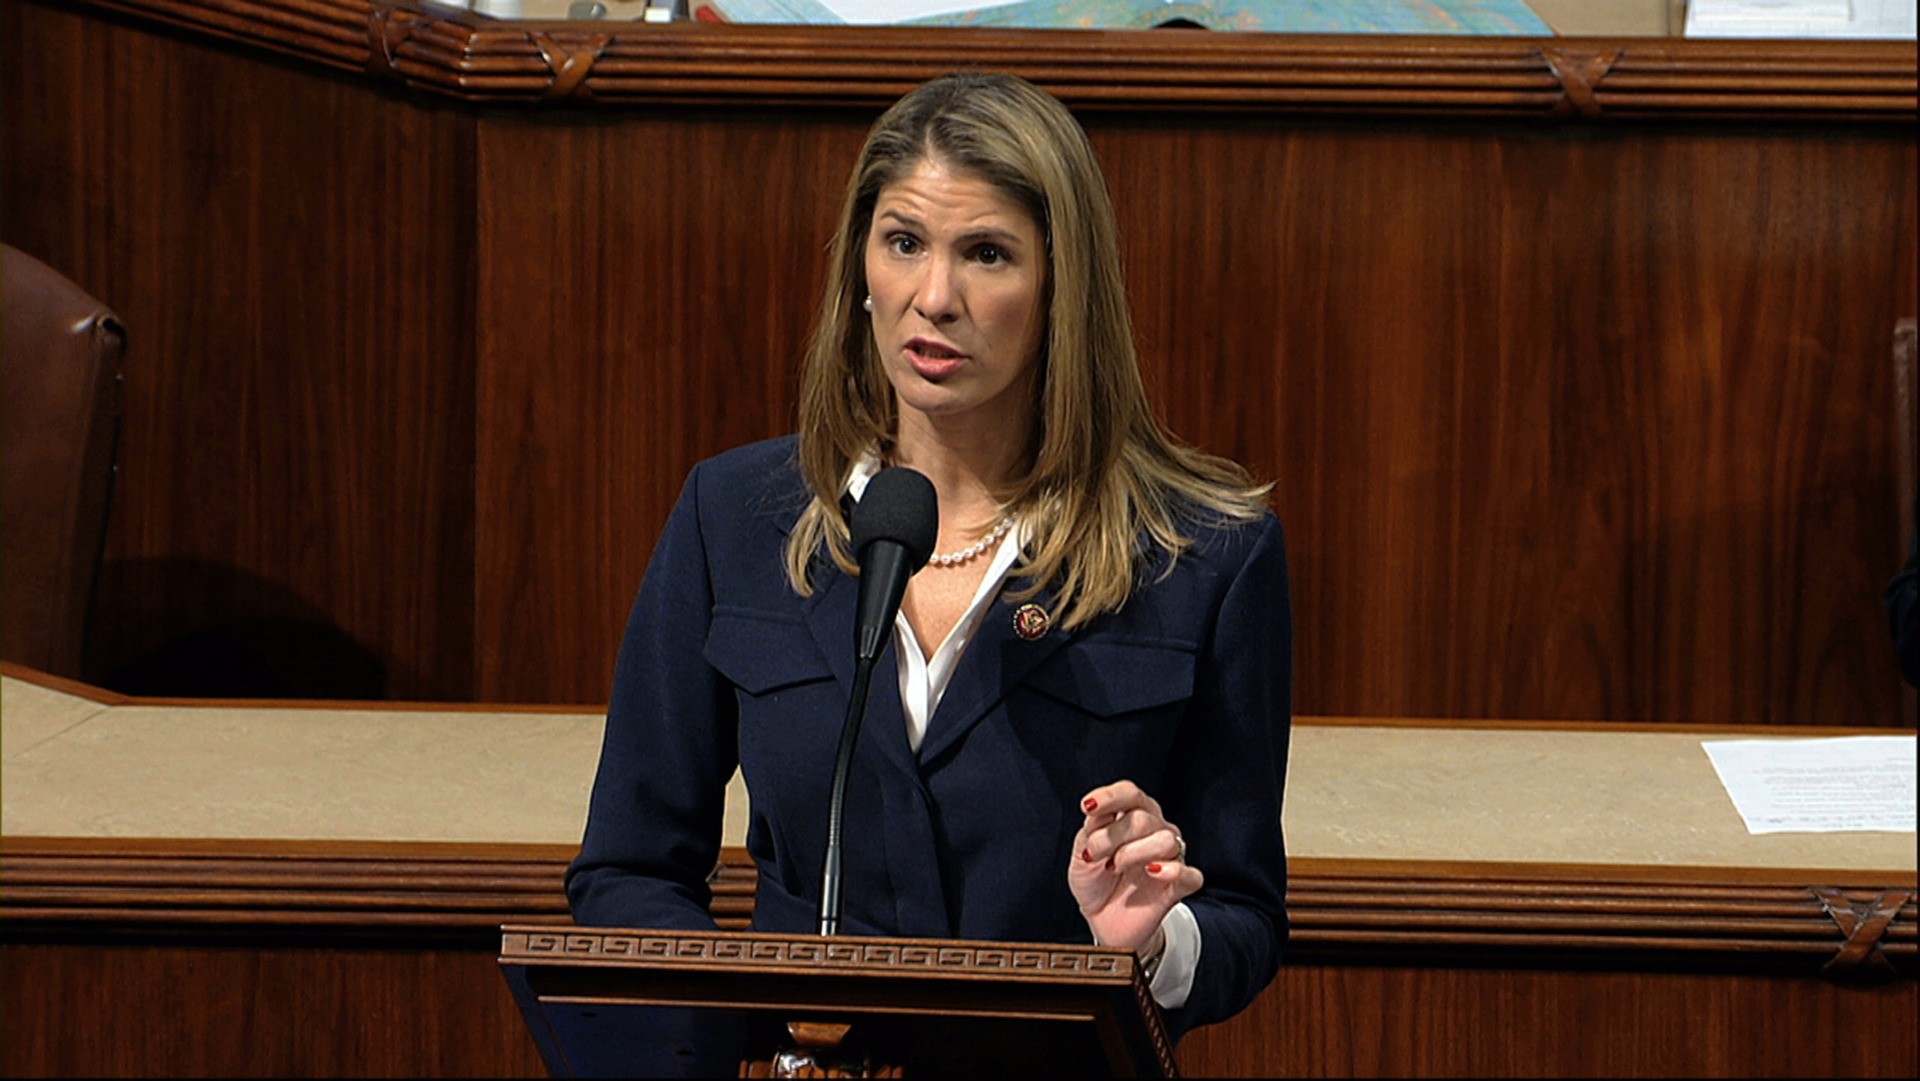 Rep. Lori Trahan, D-Mass., speaks as the House of Representatives debates the articles of impeachment against President Donald Trump at the Capitol in Washington, Wednesday, Dec. 18, 2019. (House Television via AP)